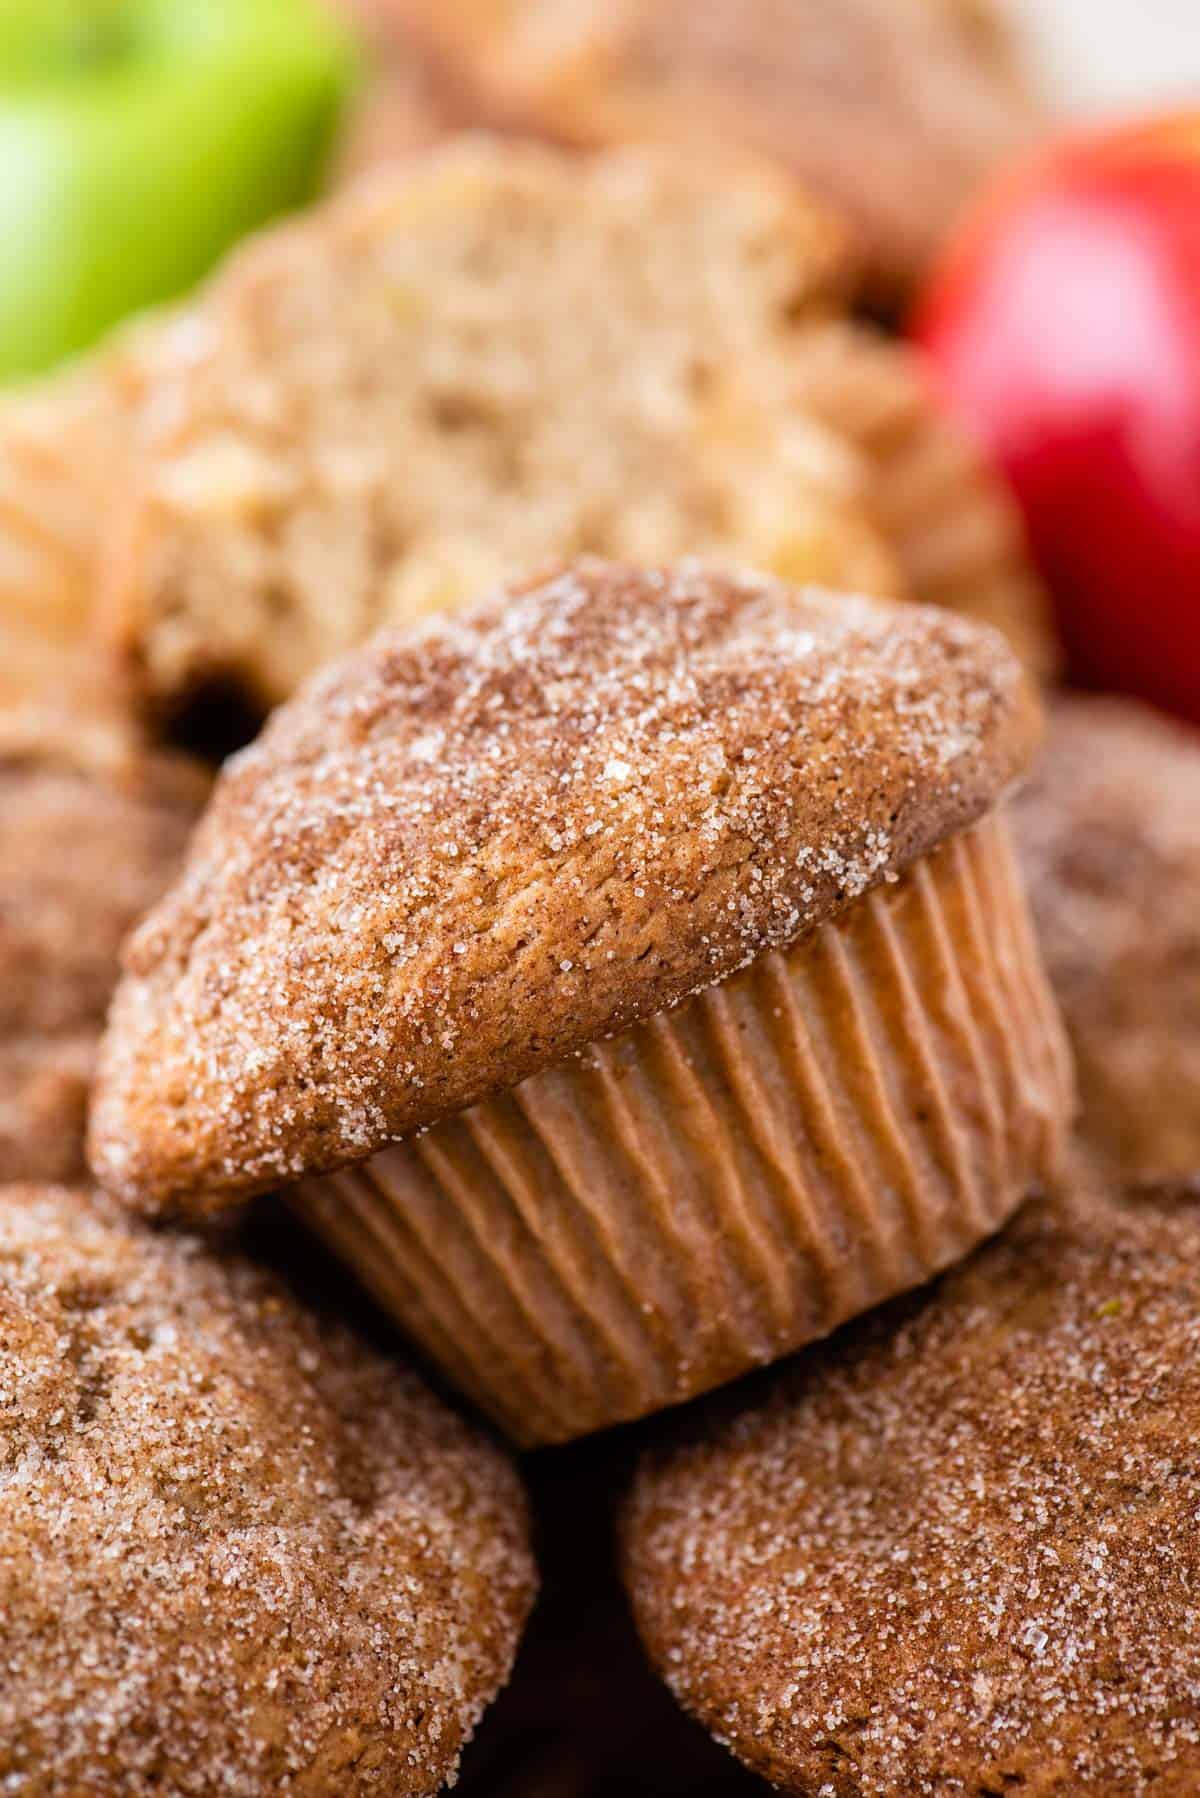 a pile of apple cinnamon muffins topped with cinnamon sugar with red and green apples in the background